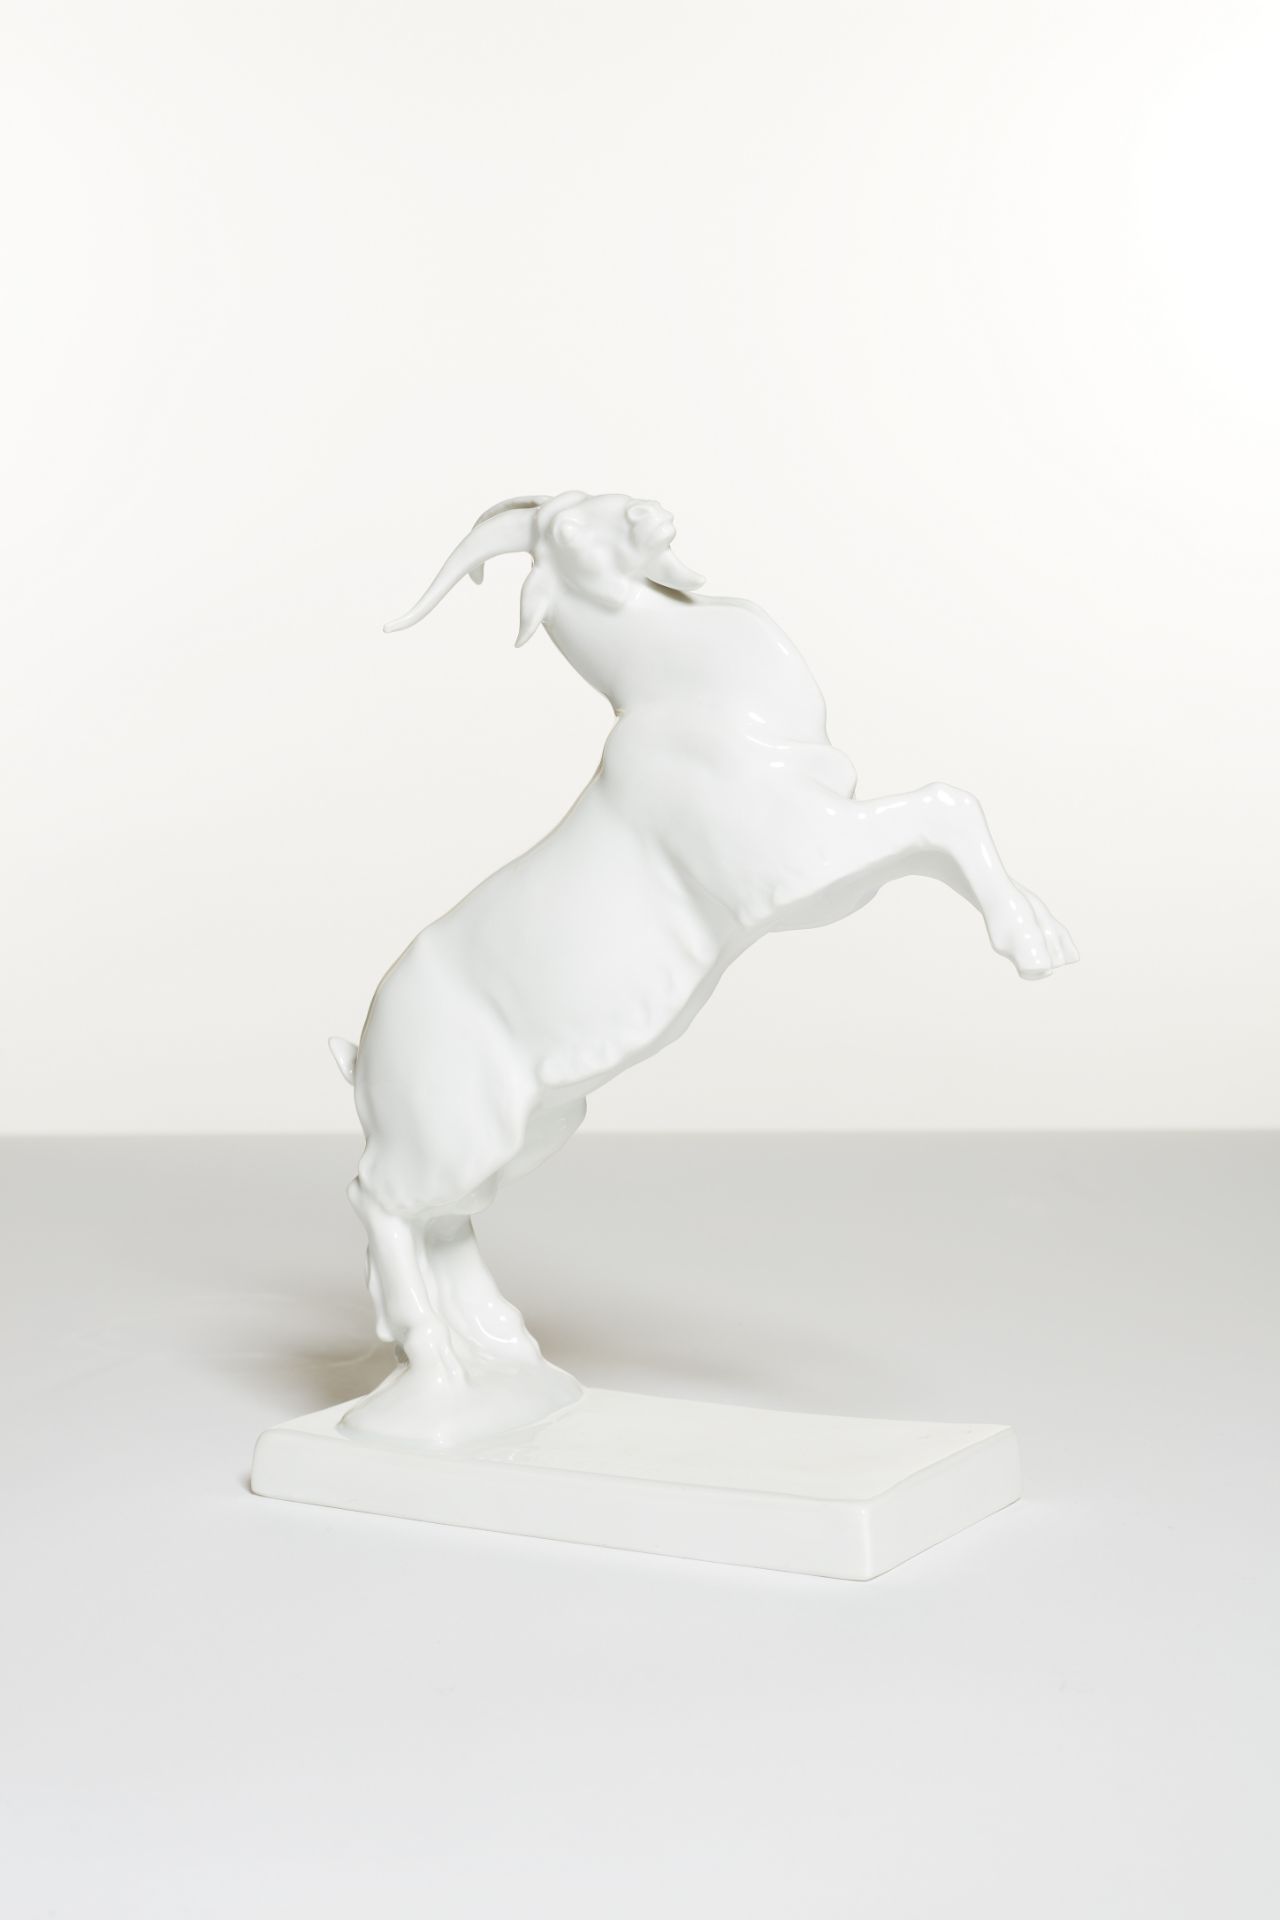 Bouquetin cabr&#233; en porcelaine blanche, Rosenthal, apr&#232;s 1949 A Rosenthal white model of...